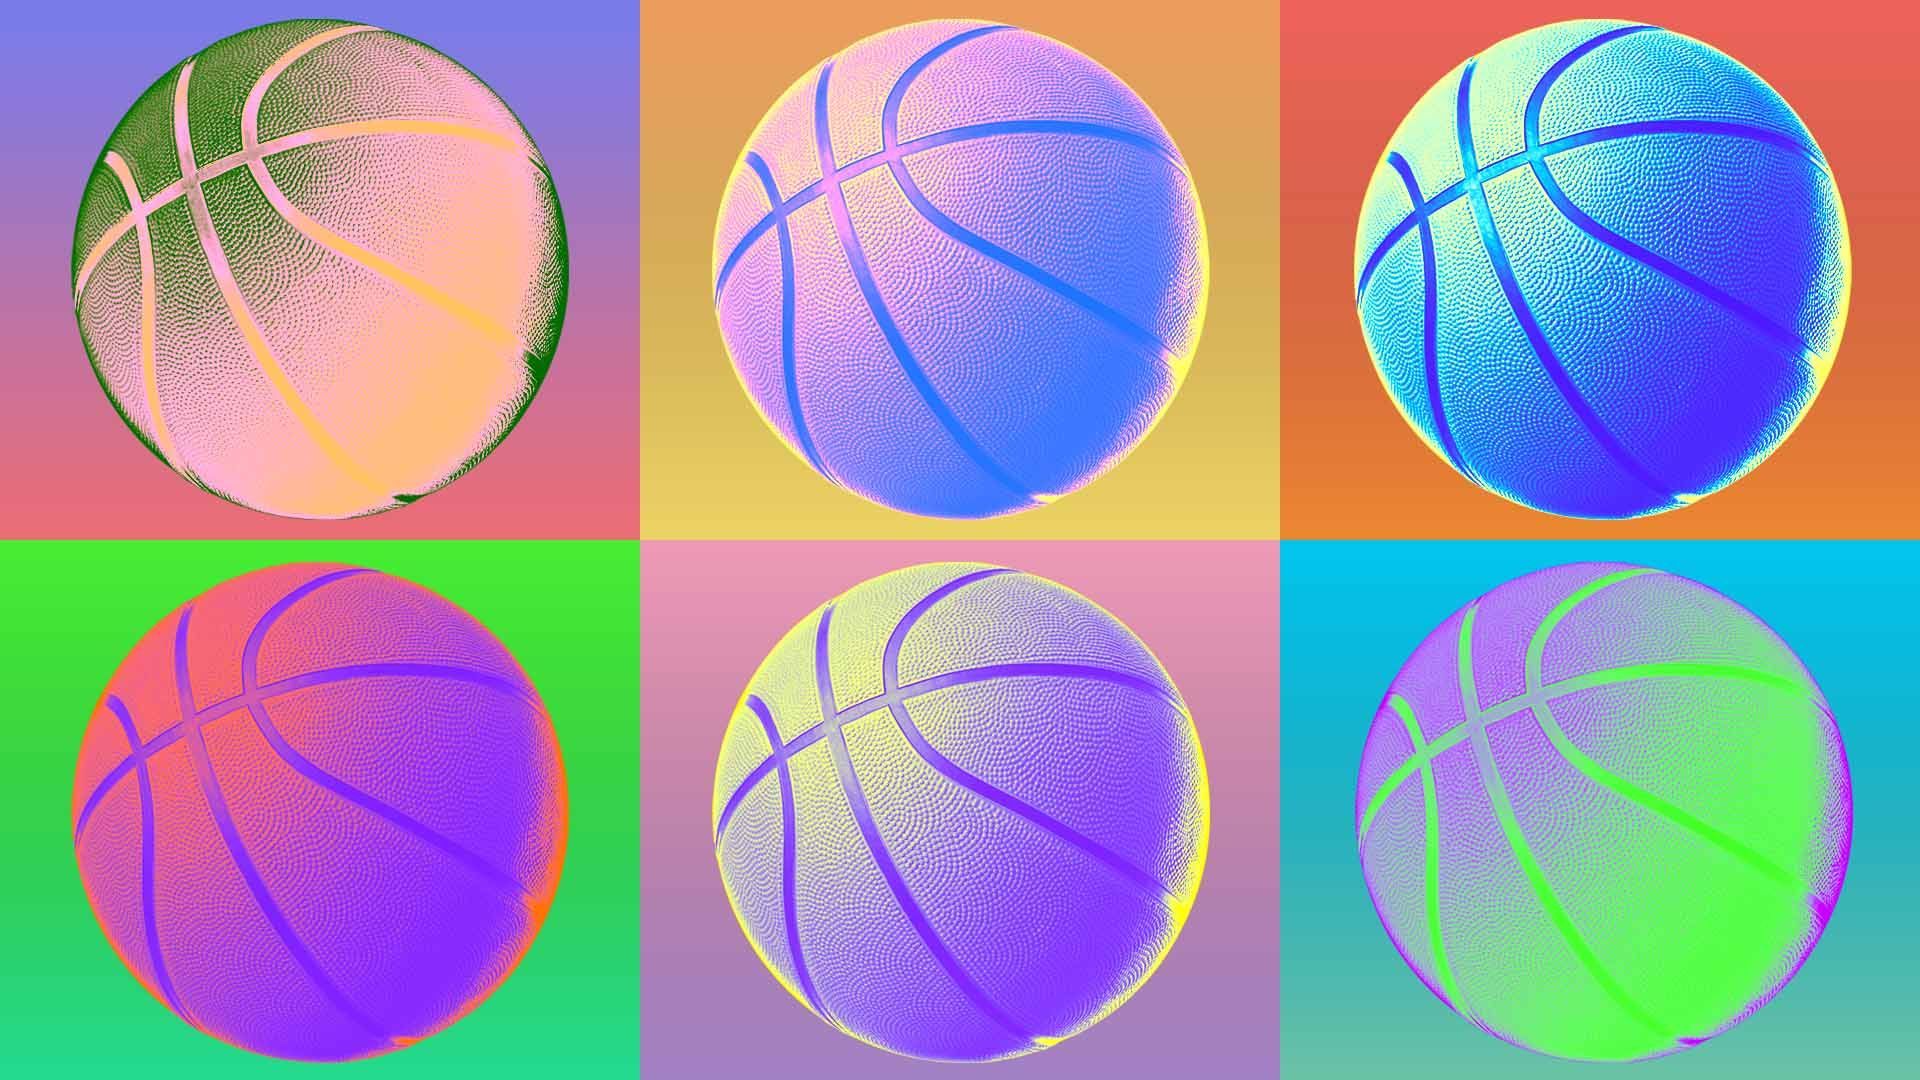 Illustration of a series of basketballs in different colors in an Andy Warhol-esque composition